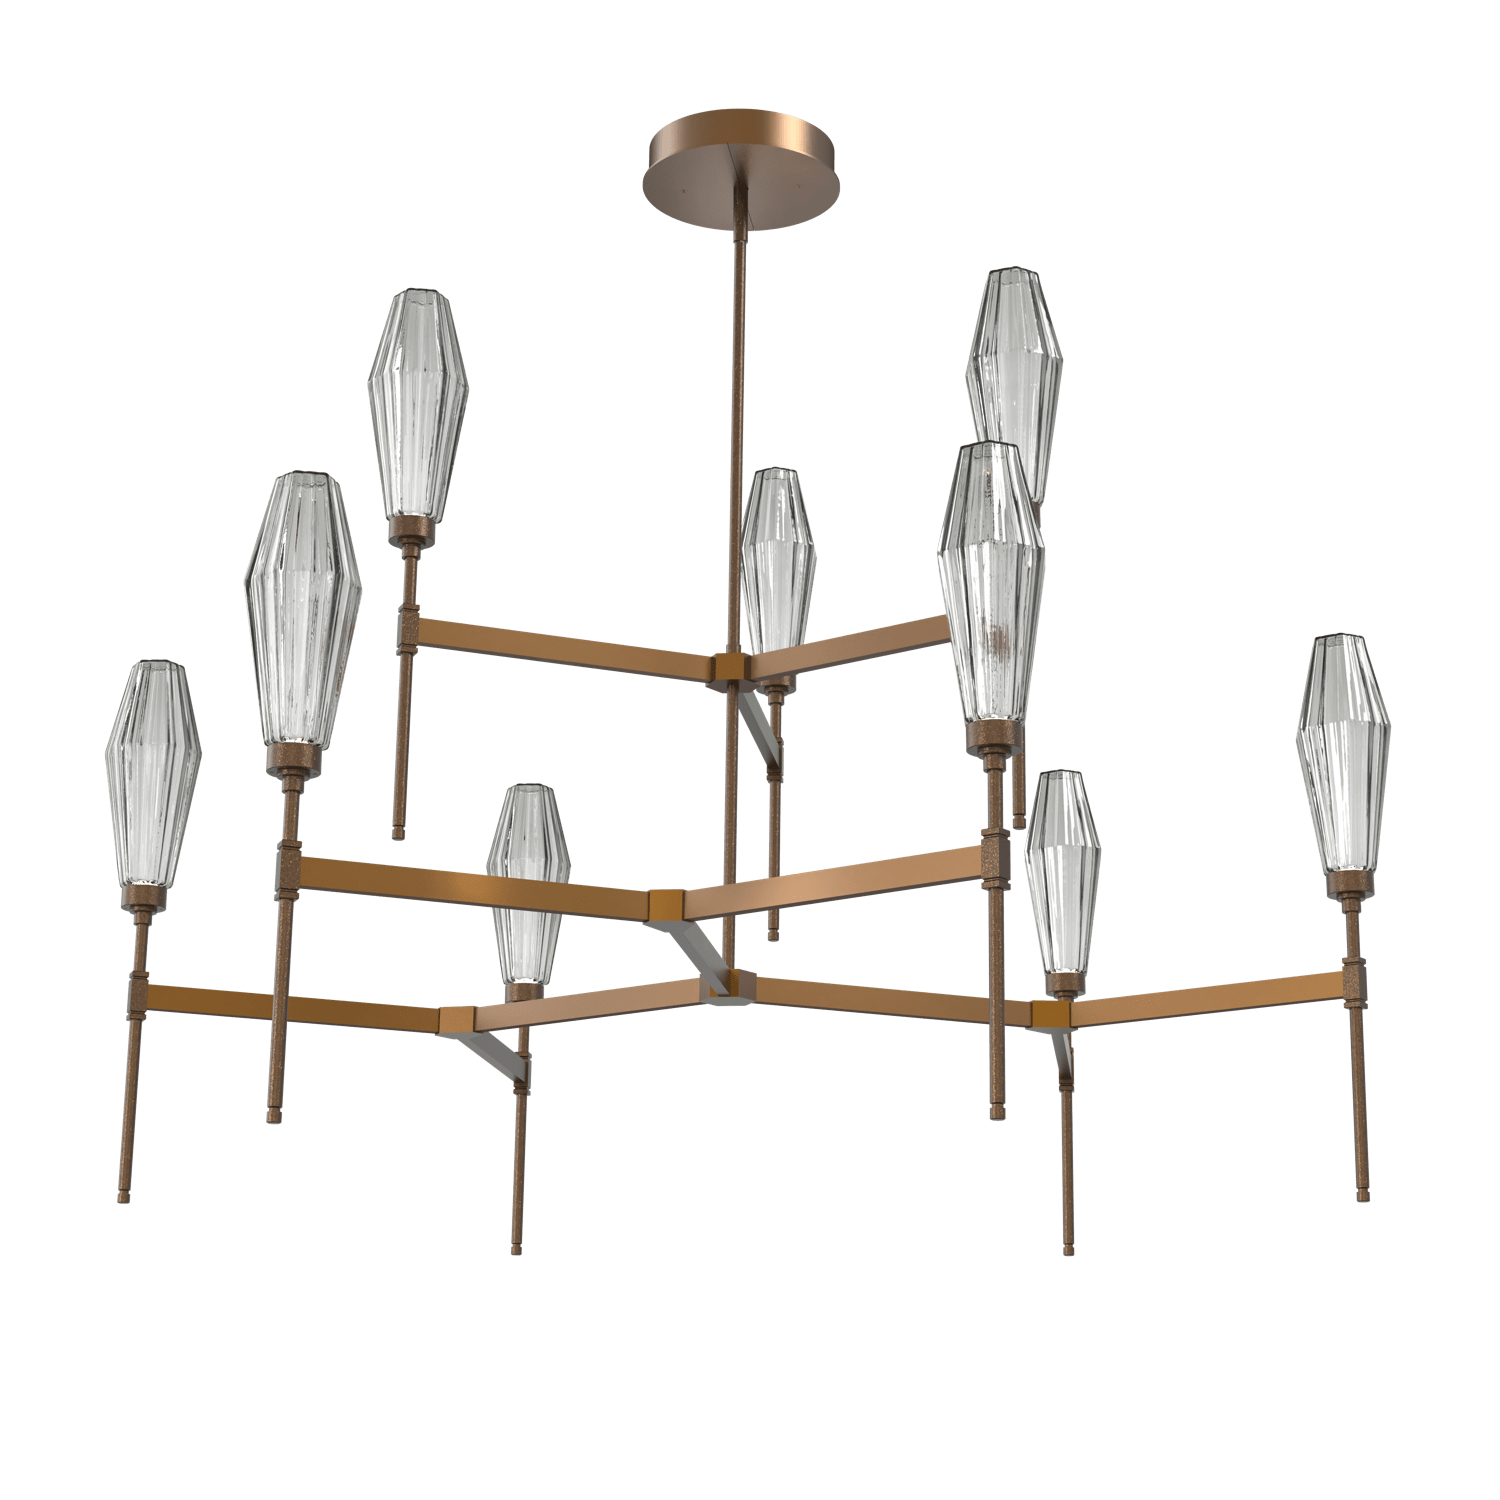 CHB0049-54-FB-RS-Hammerton-Studio-Aalto-54-inch-round-two-tier-belvedere-chandelier-with-flat-bronze-finish-and-optic-ribbed-smoke-glass-shades-and-LED-lamping